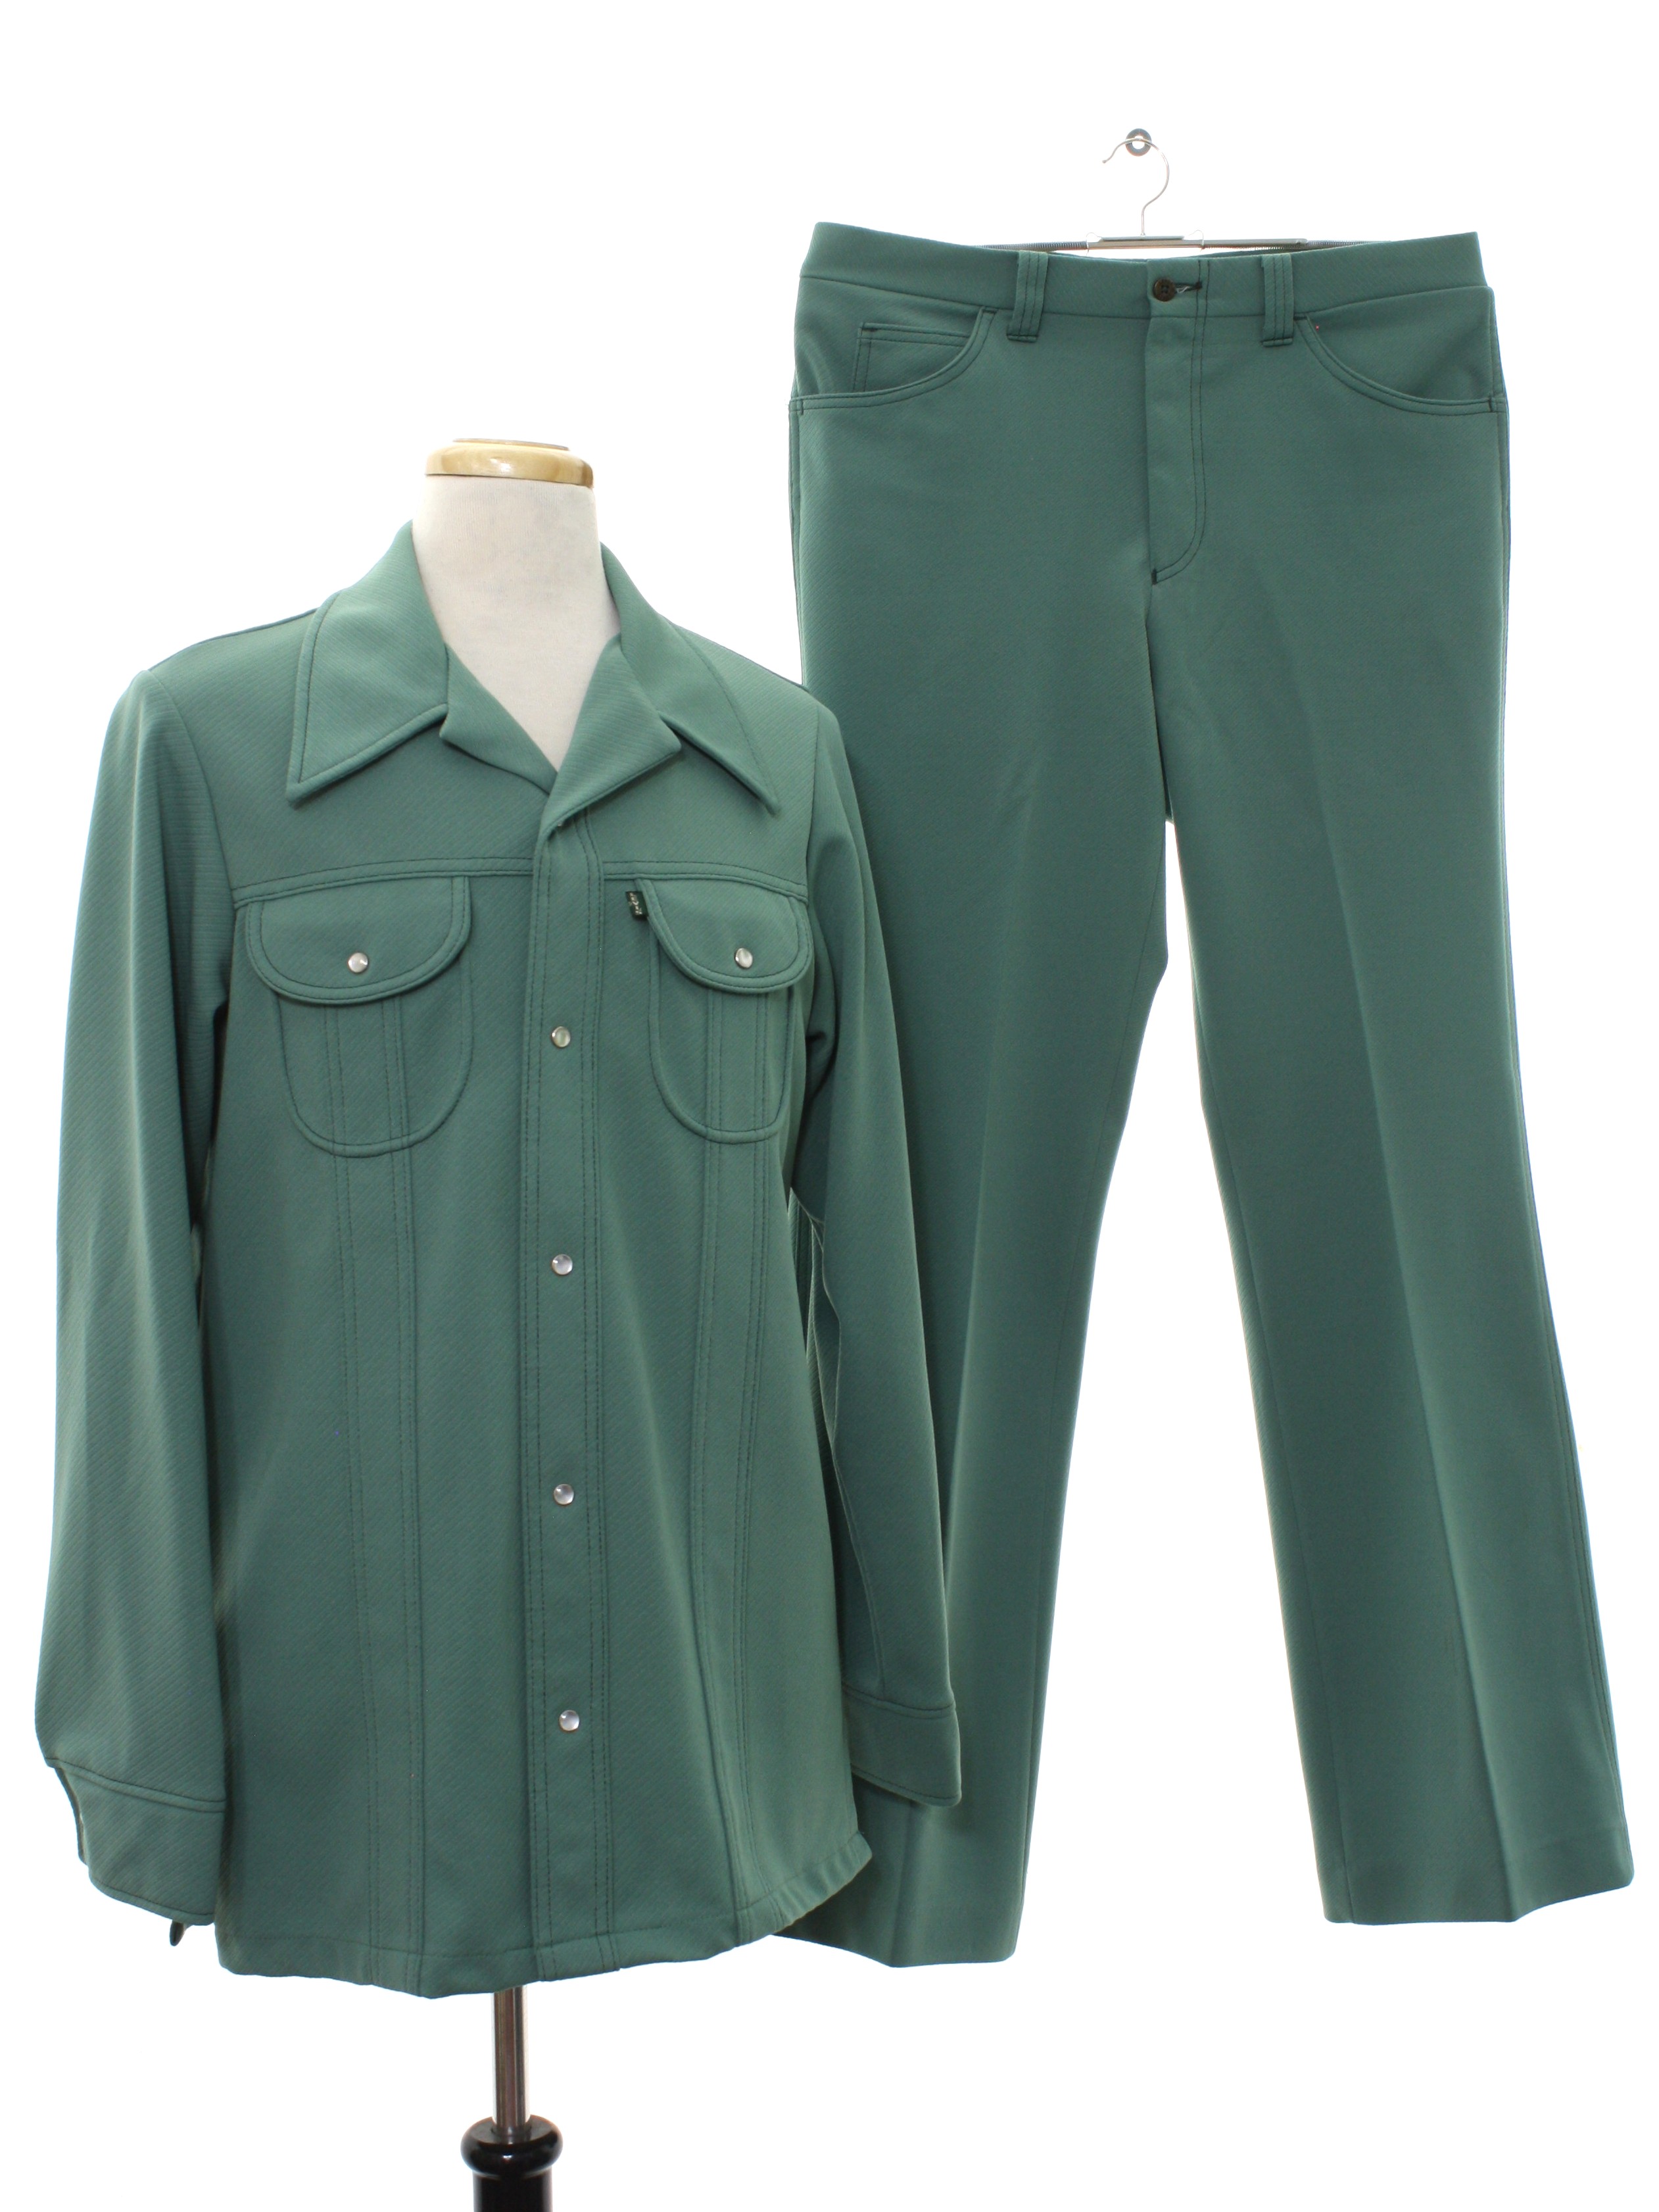 Levi Panatela Seventies Vintage Leisure Suit: 70s -Levi Panatela- Mens sage  green, polyester, twill knit, blazer, having dark green topstitching on the  button band, and on other points of design interest. White